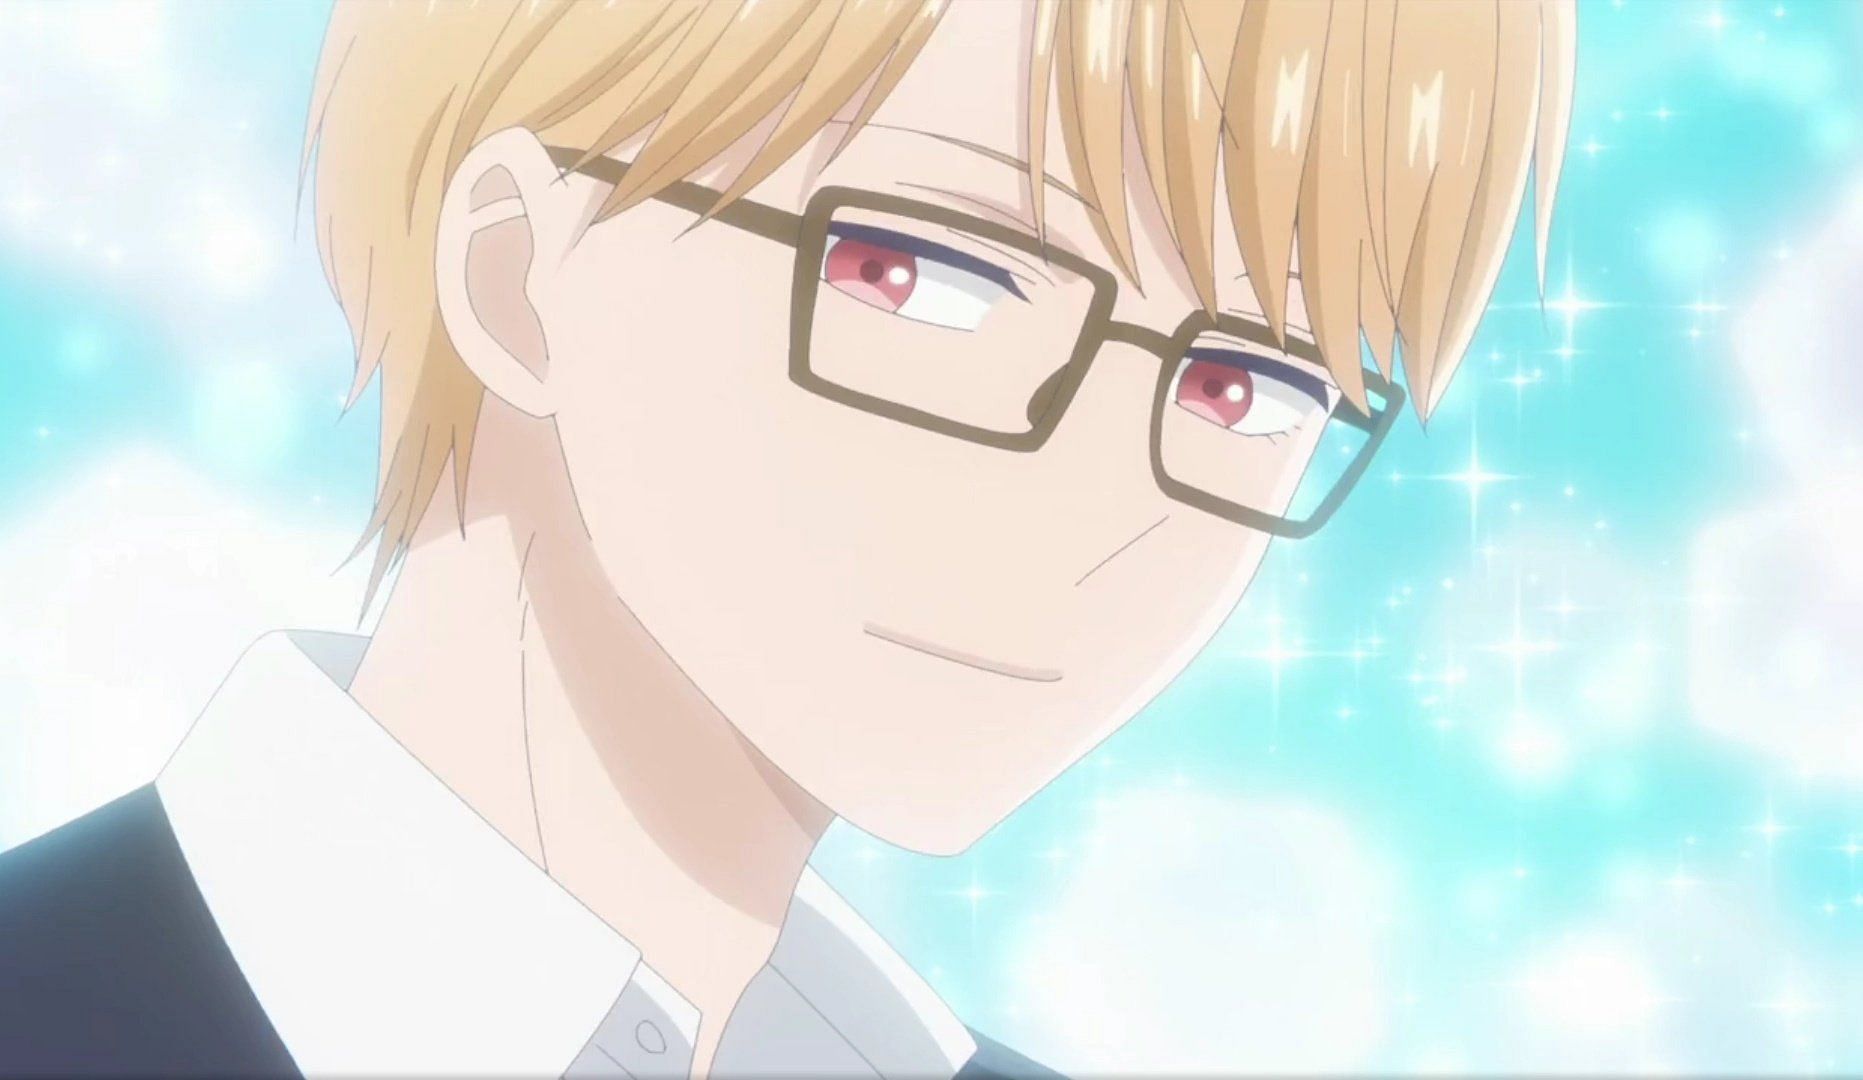 My Love Story with Yamada-kun at Lv999 Episode 4 Release Date 